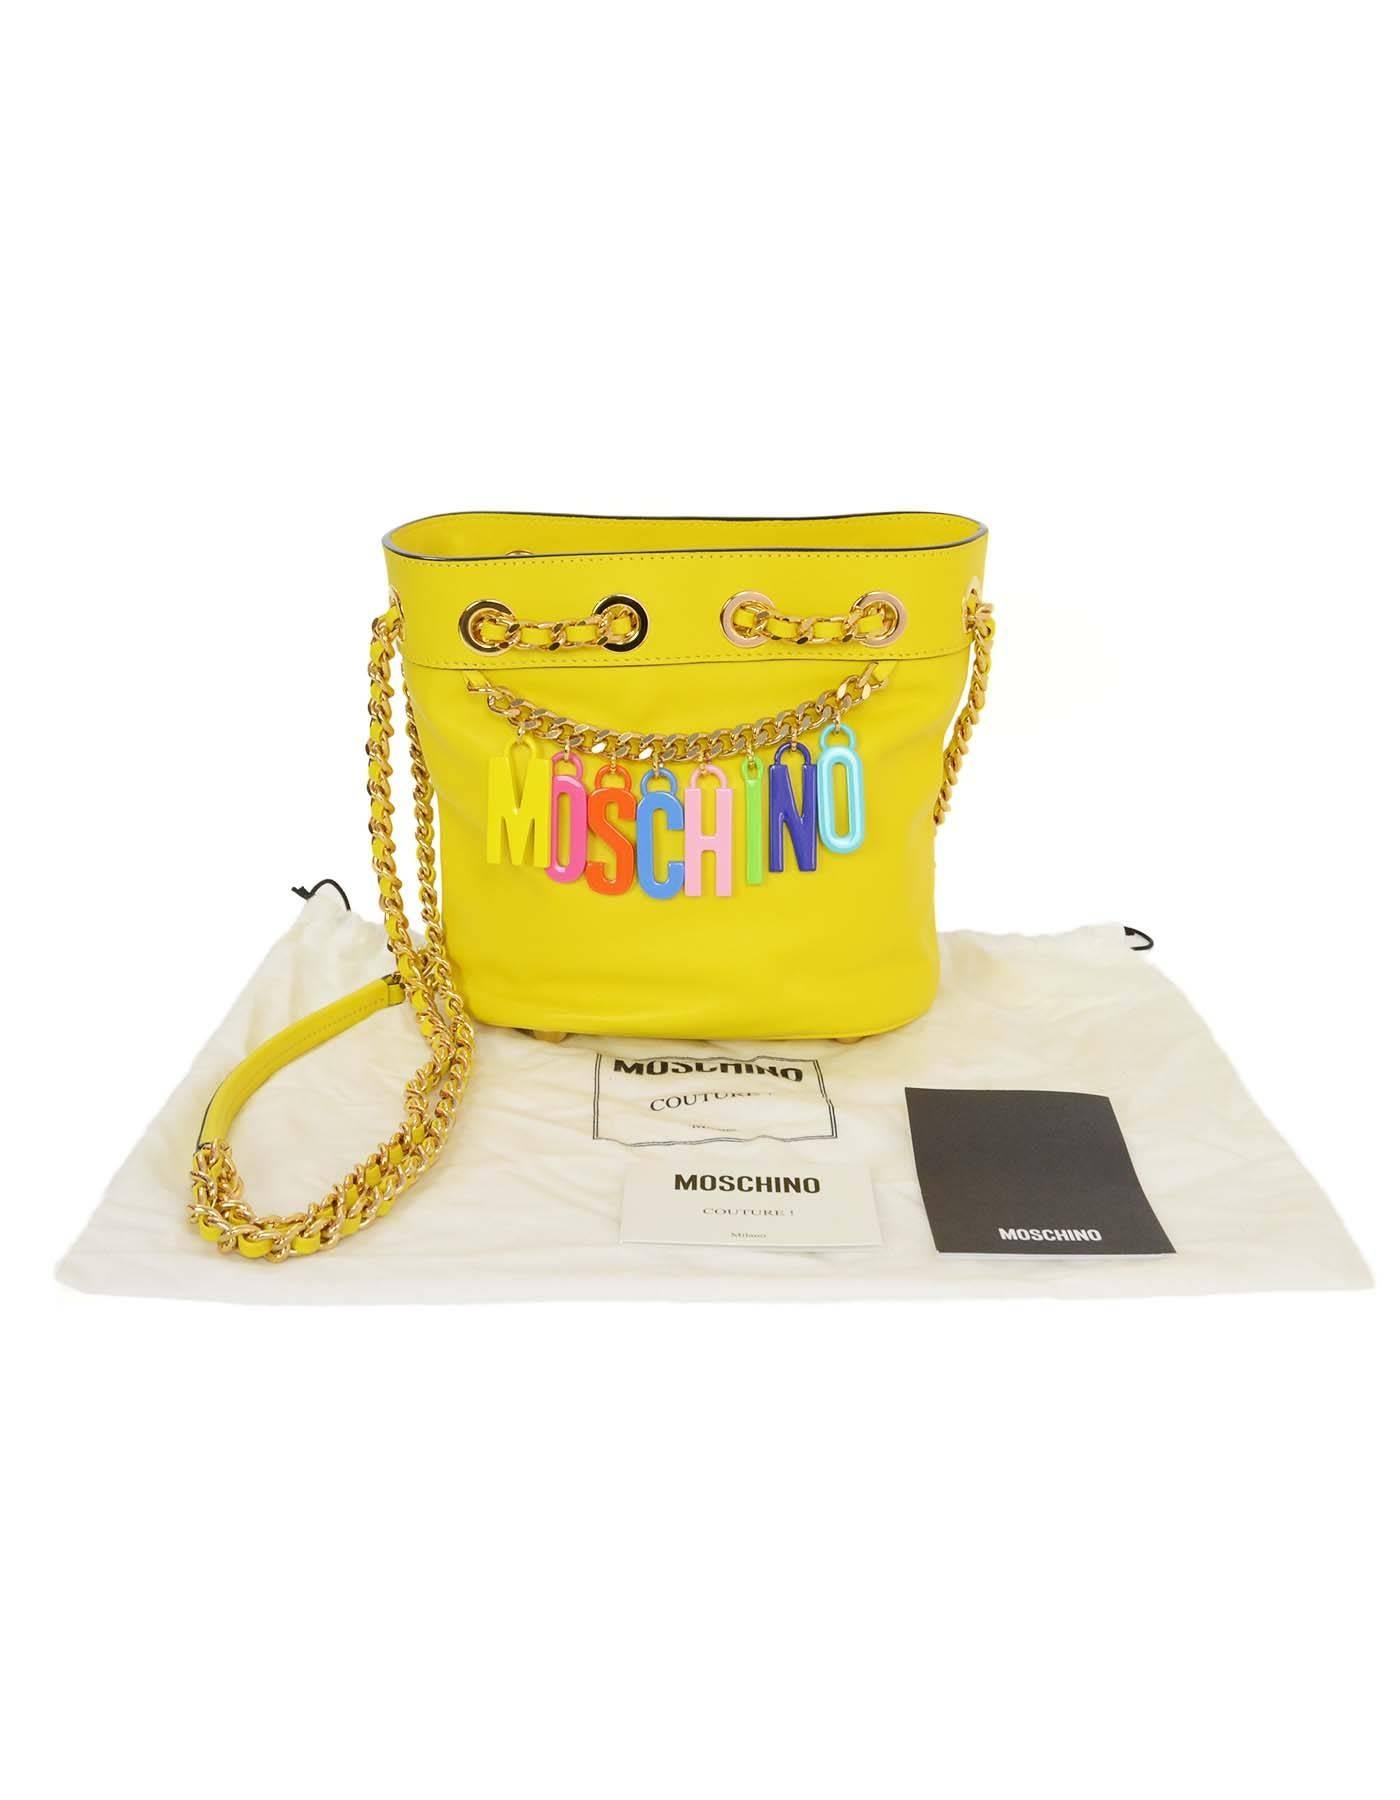 Moschino SOLD OUT Yellow Charm Bucket Crossbody Bag GHW 5